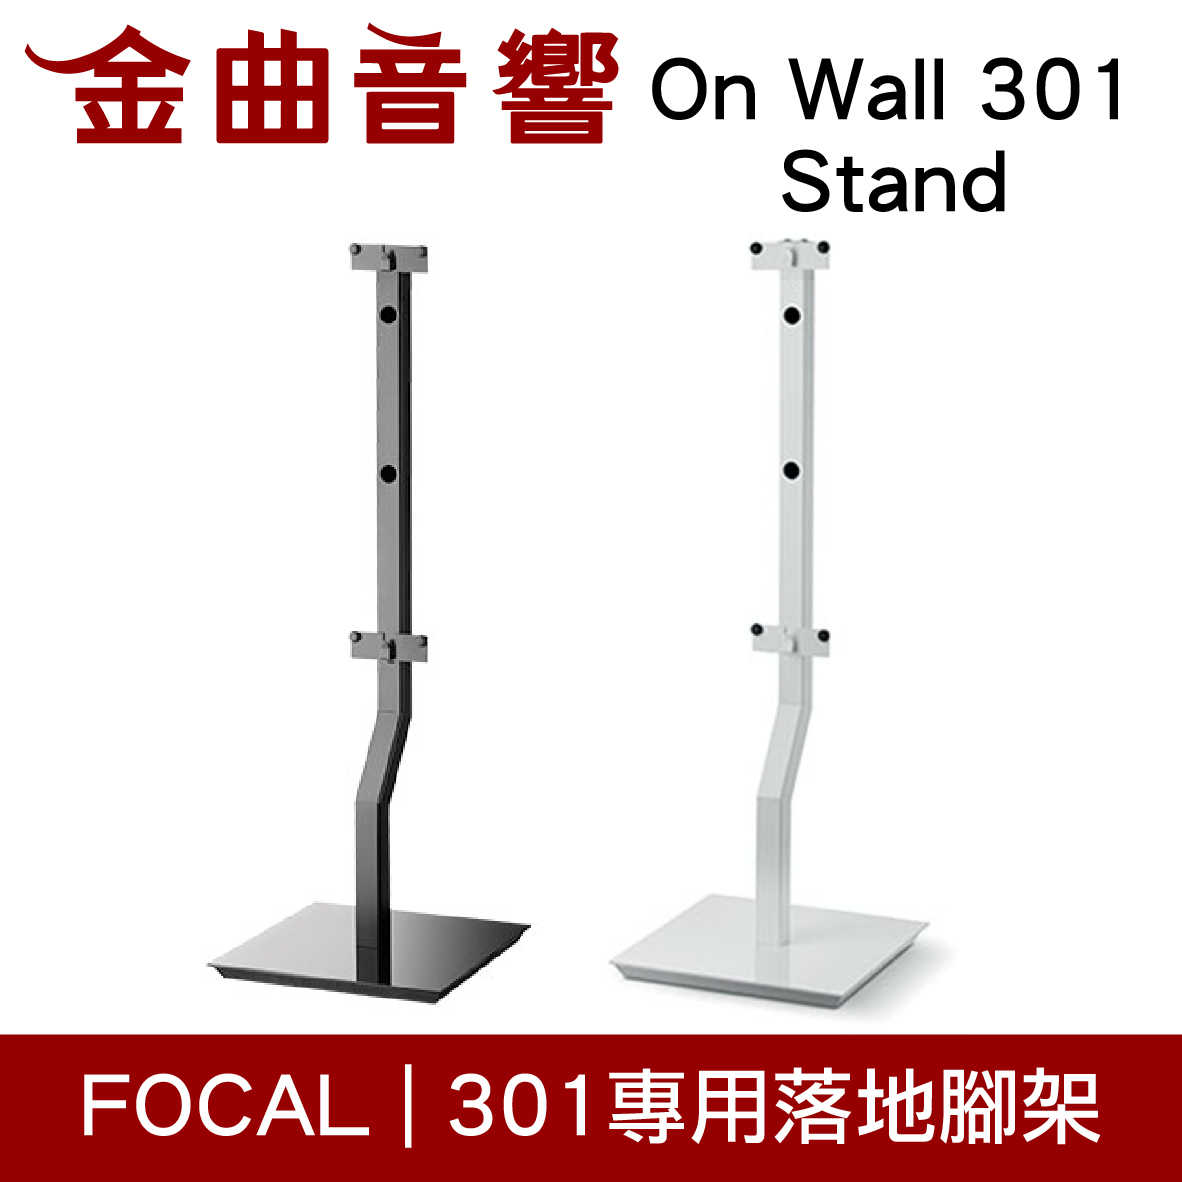 FOCAL On Wall 301 Stand 專用 支架 落地腳架（一對）| 金曲音響